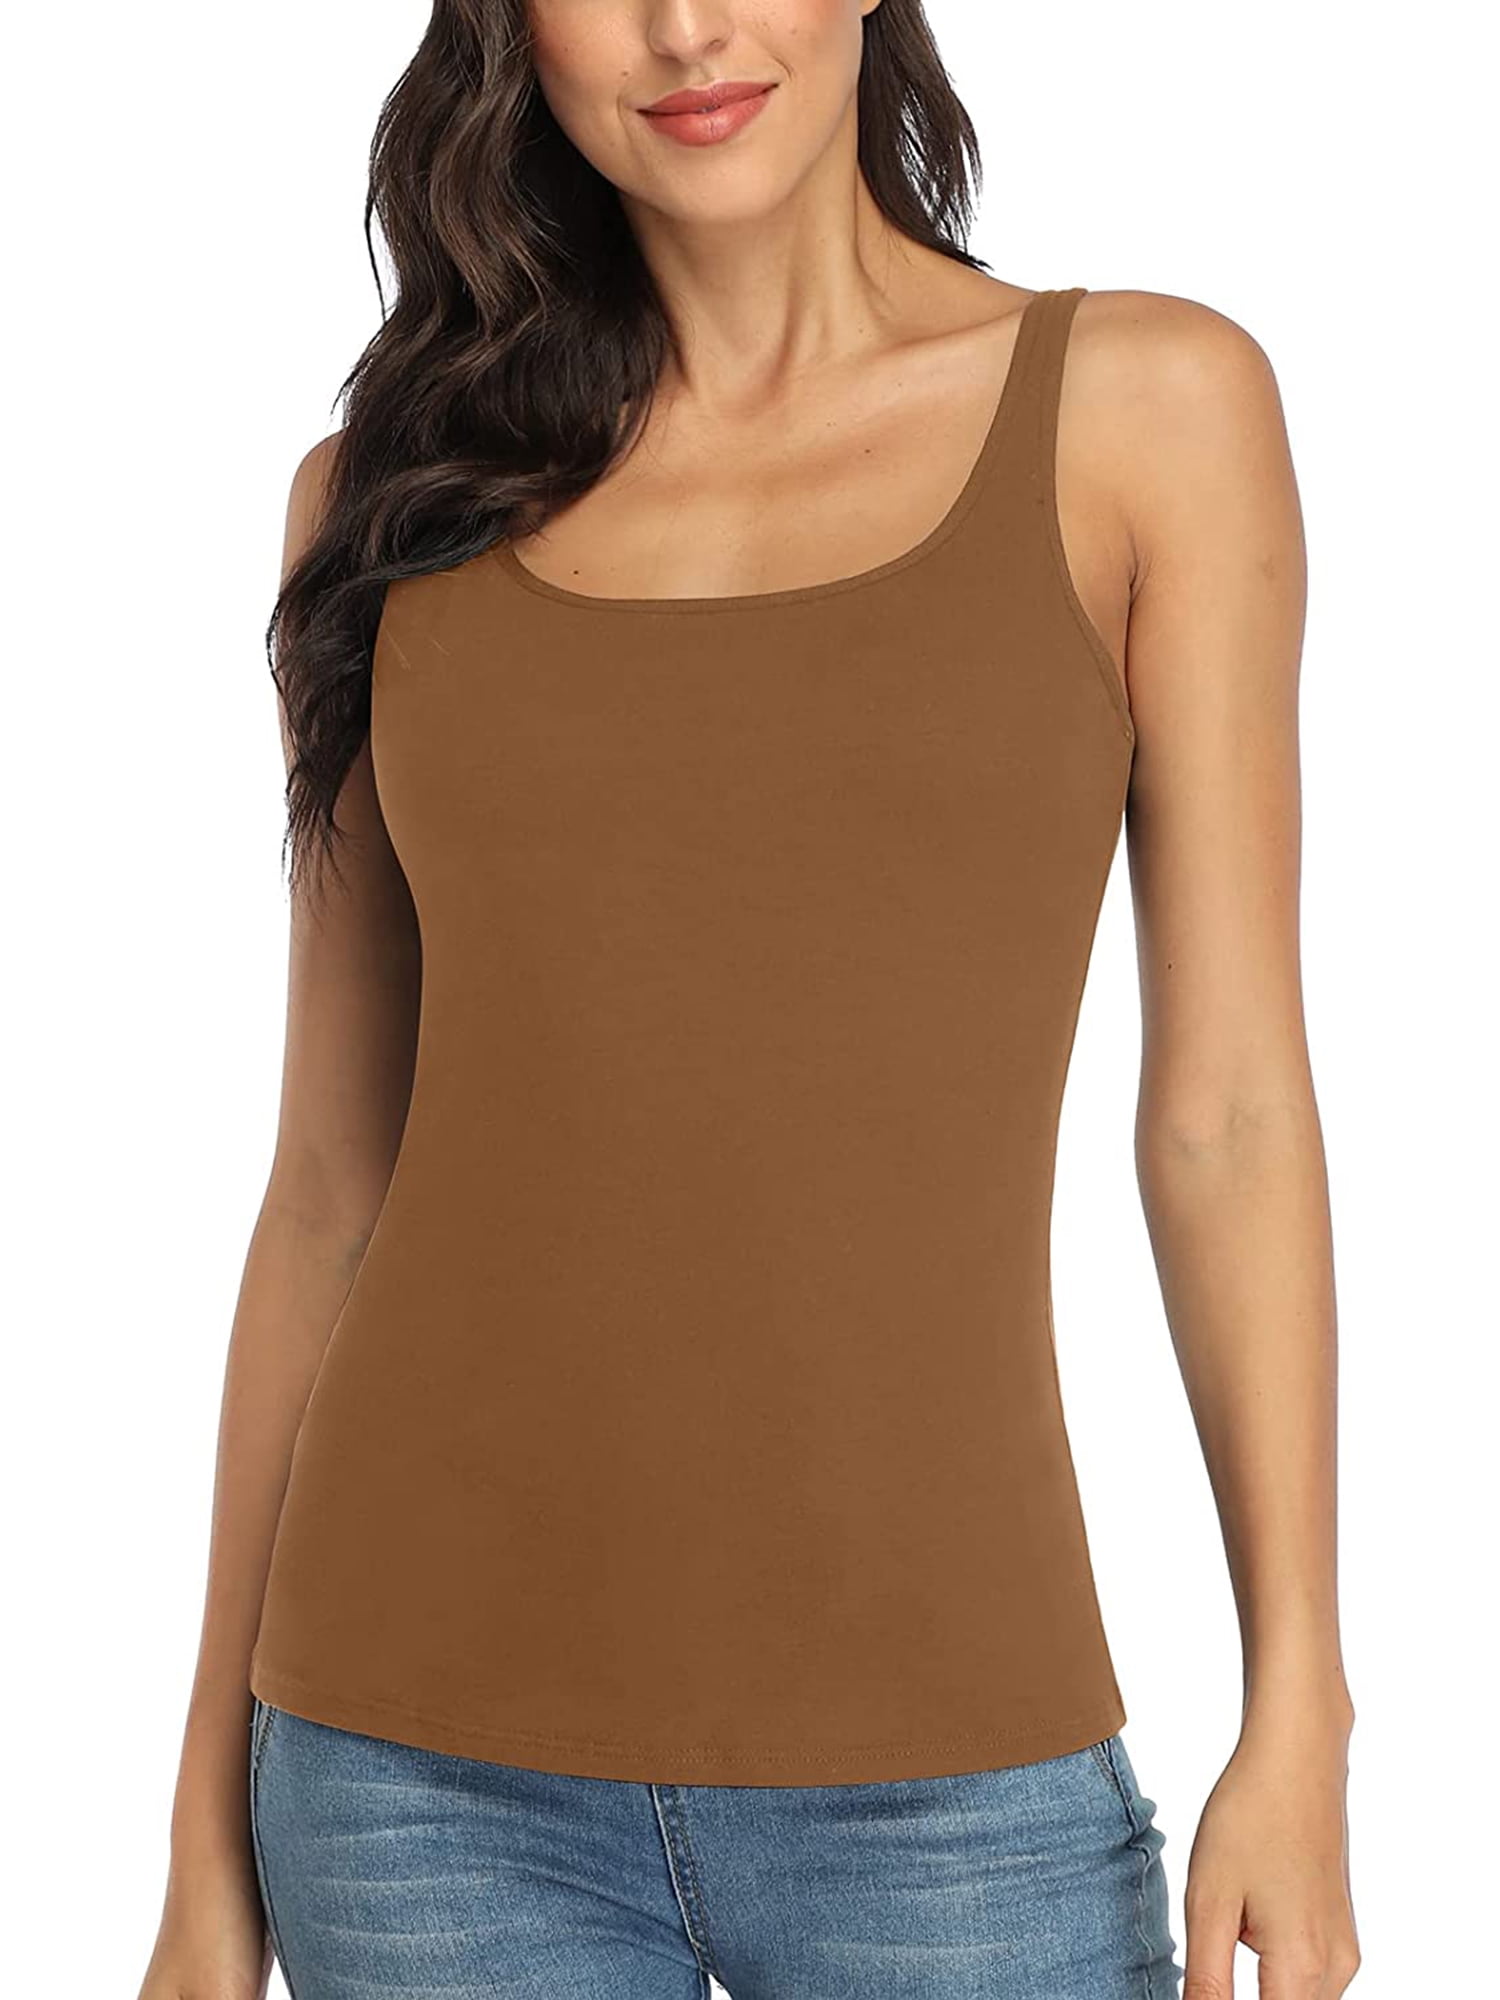  Wocrolse Womens Cotton Tank Tops with Built in Bra Camisole,  Adjustable Strap Yoga Shirts with Shelf Bra for Workout (Color : Beige,  Size : Small) : ביגוד, נעליים ותכשיטים